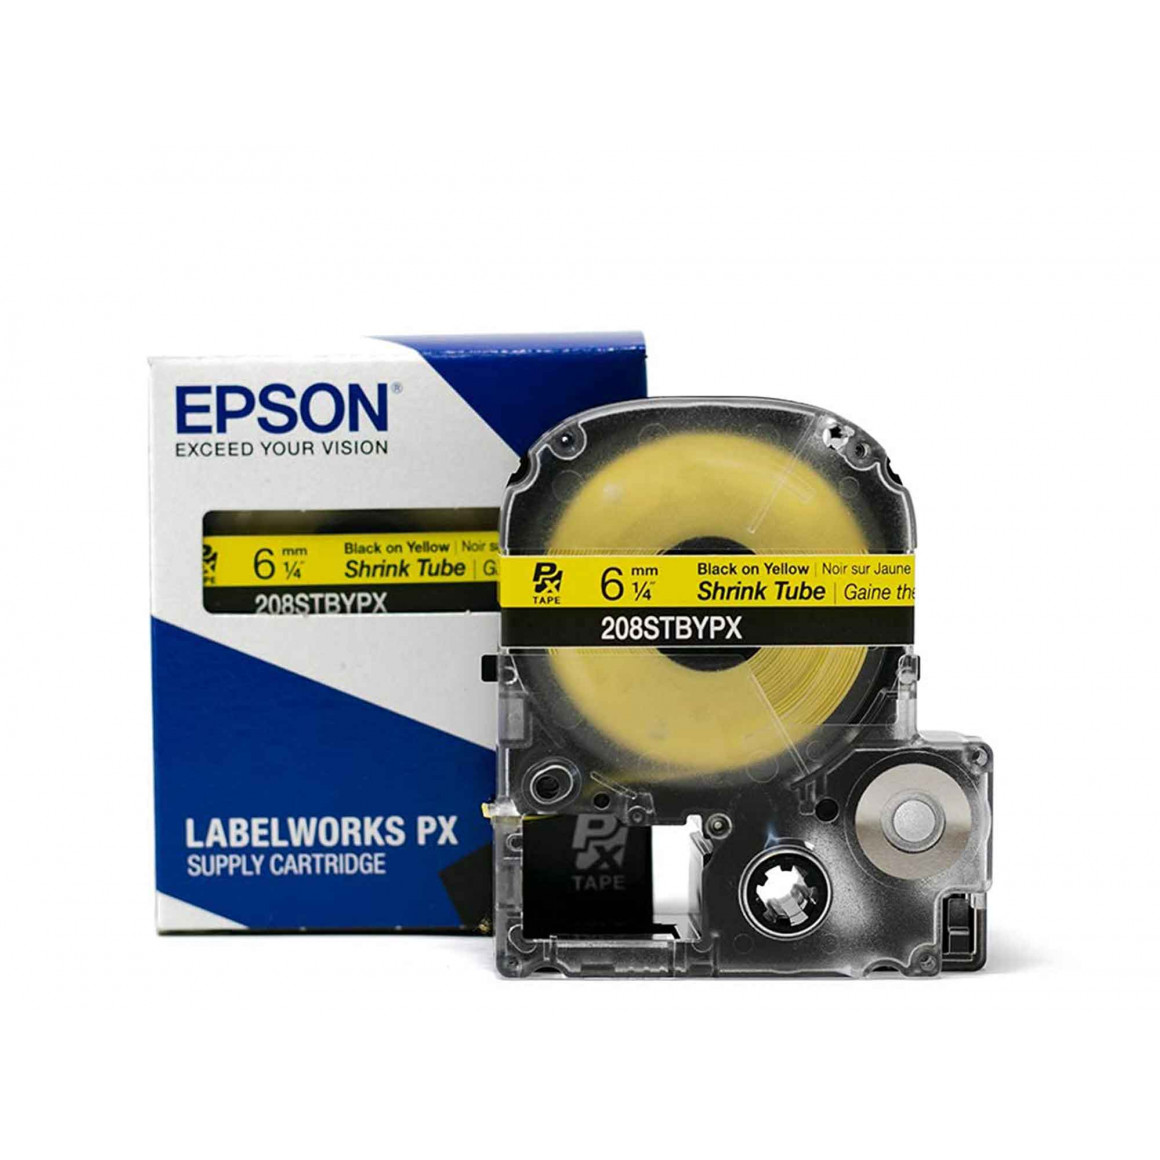 cartrige & ink EPSON LABEL TAPE LK3YBW STRONG ADH BK/YELLOW 9/9